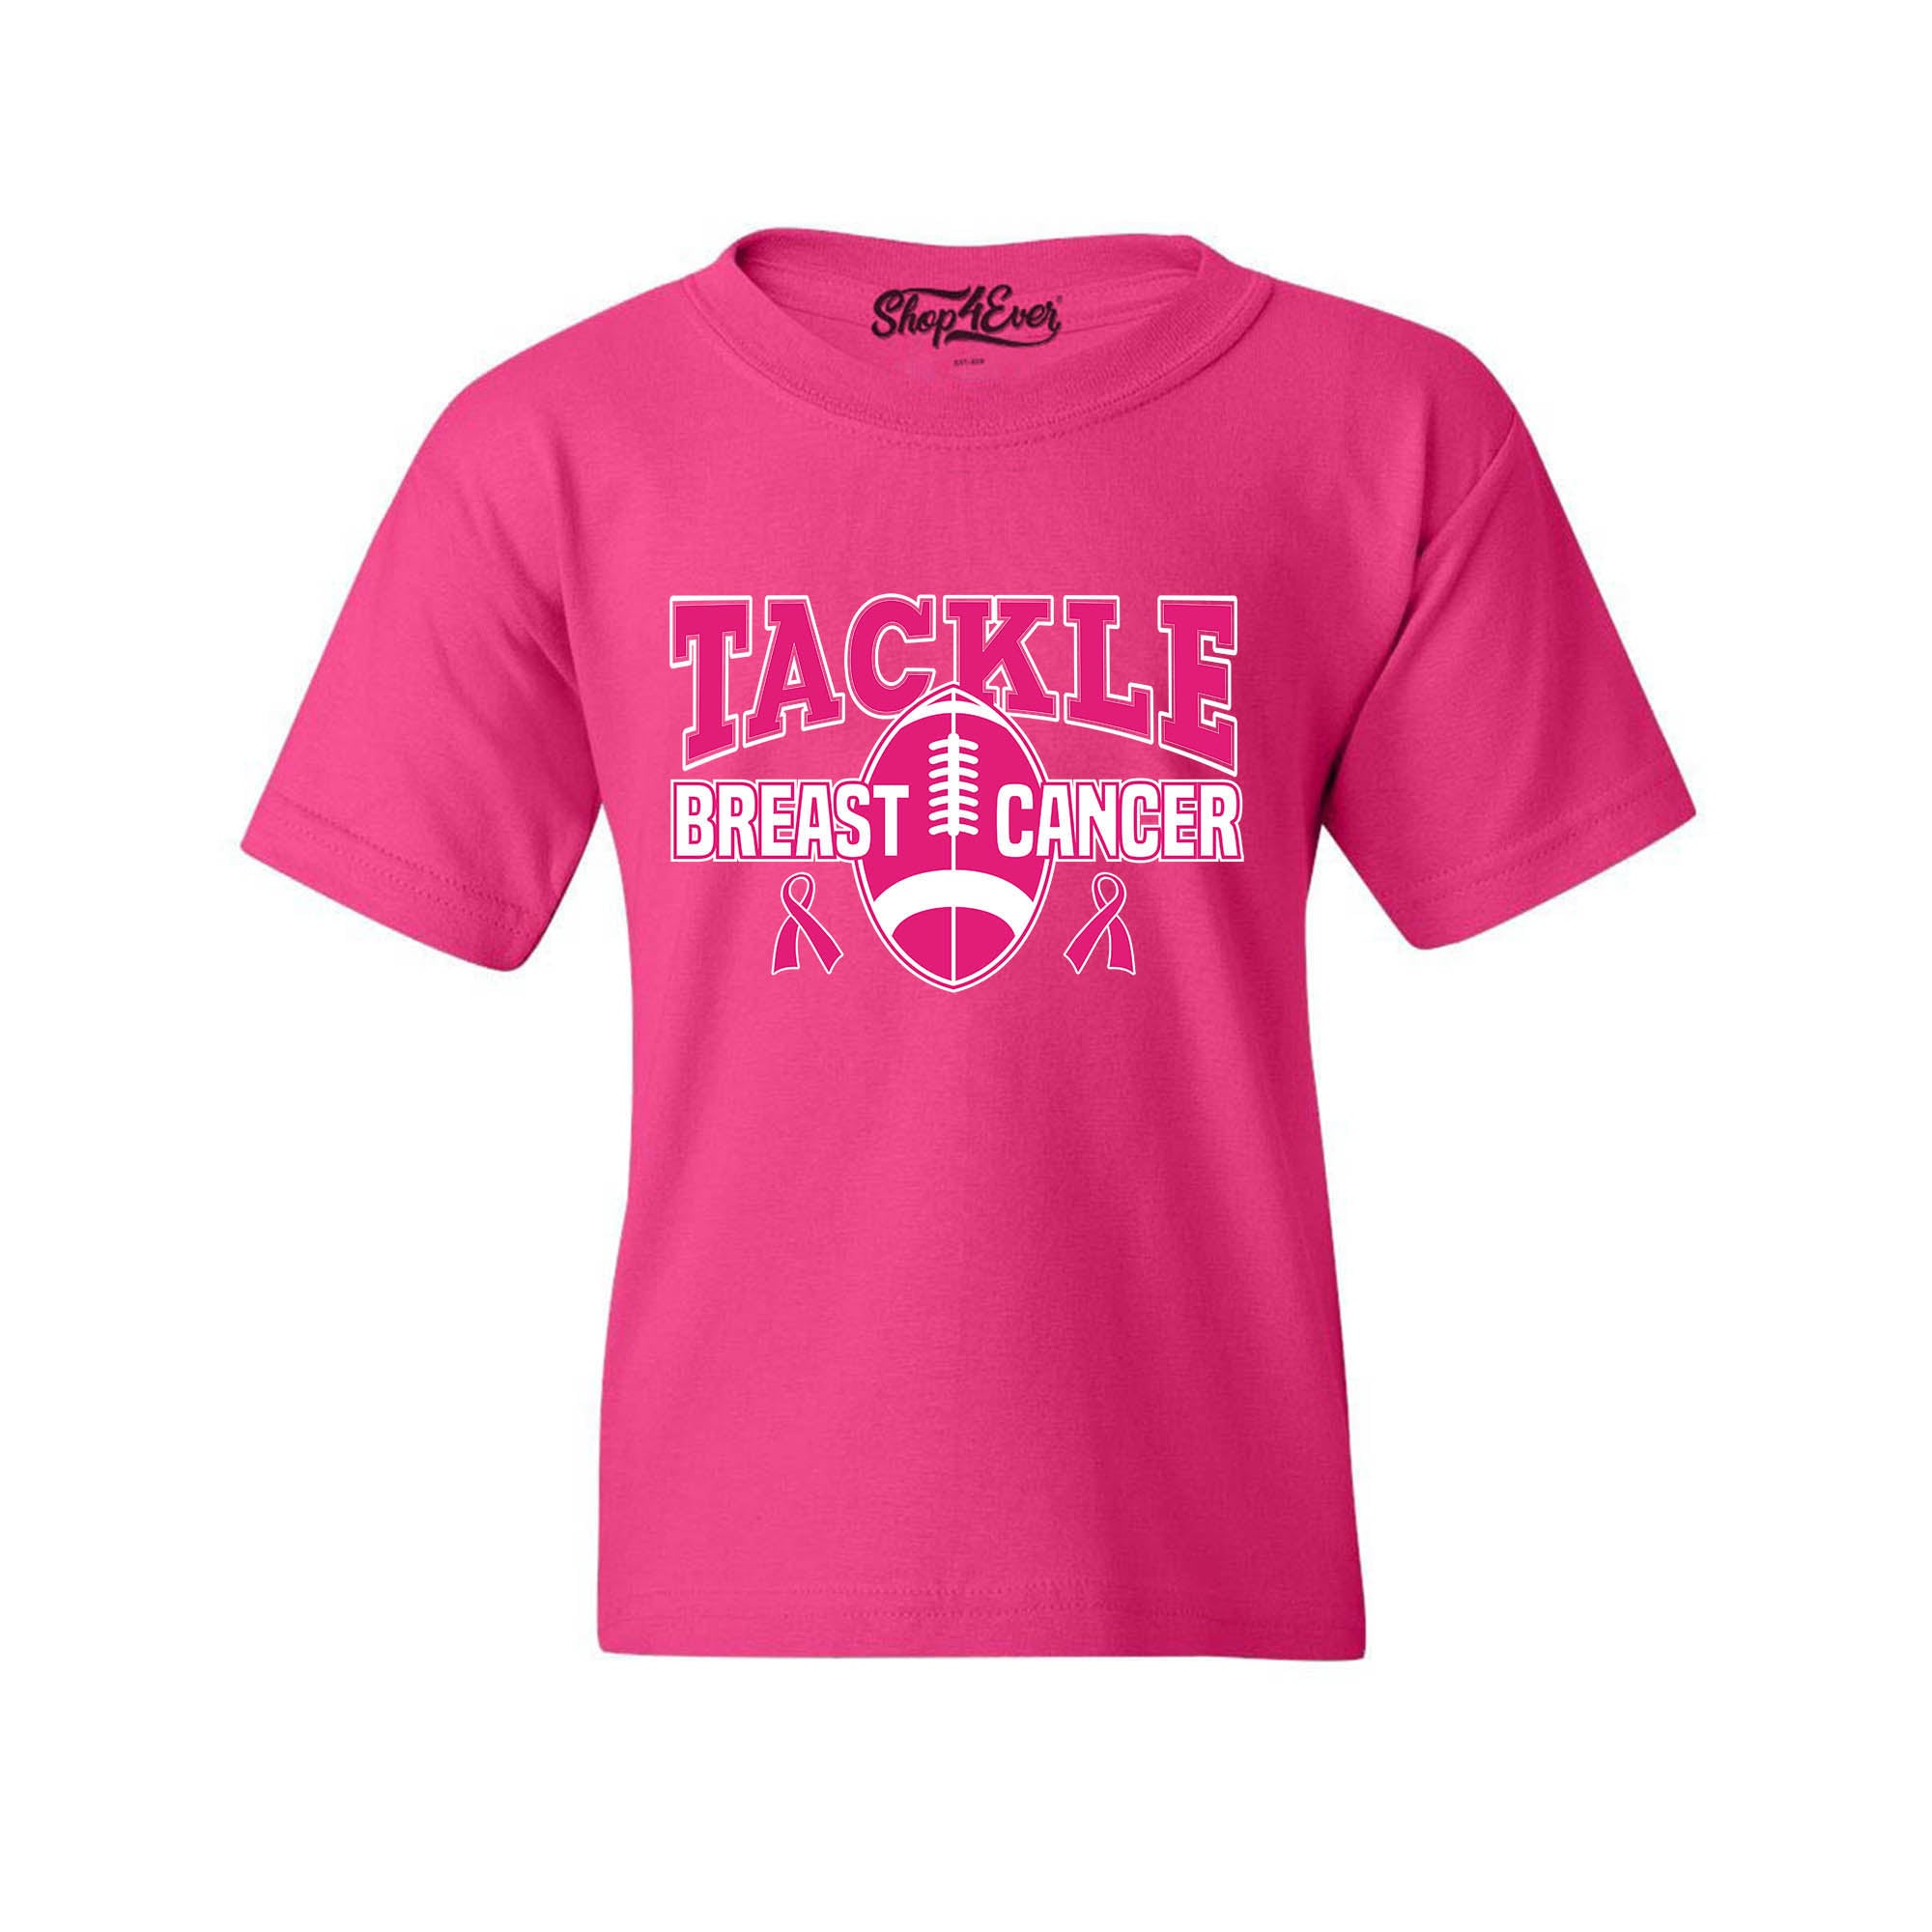 Tackle Breast Cancer Awareness Youth's T-Shirt Support Child's Tee